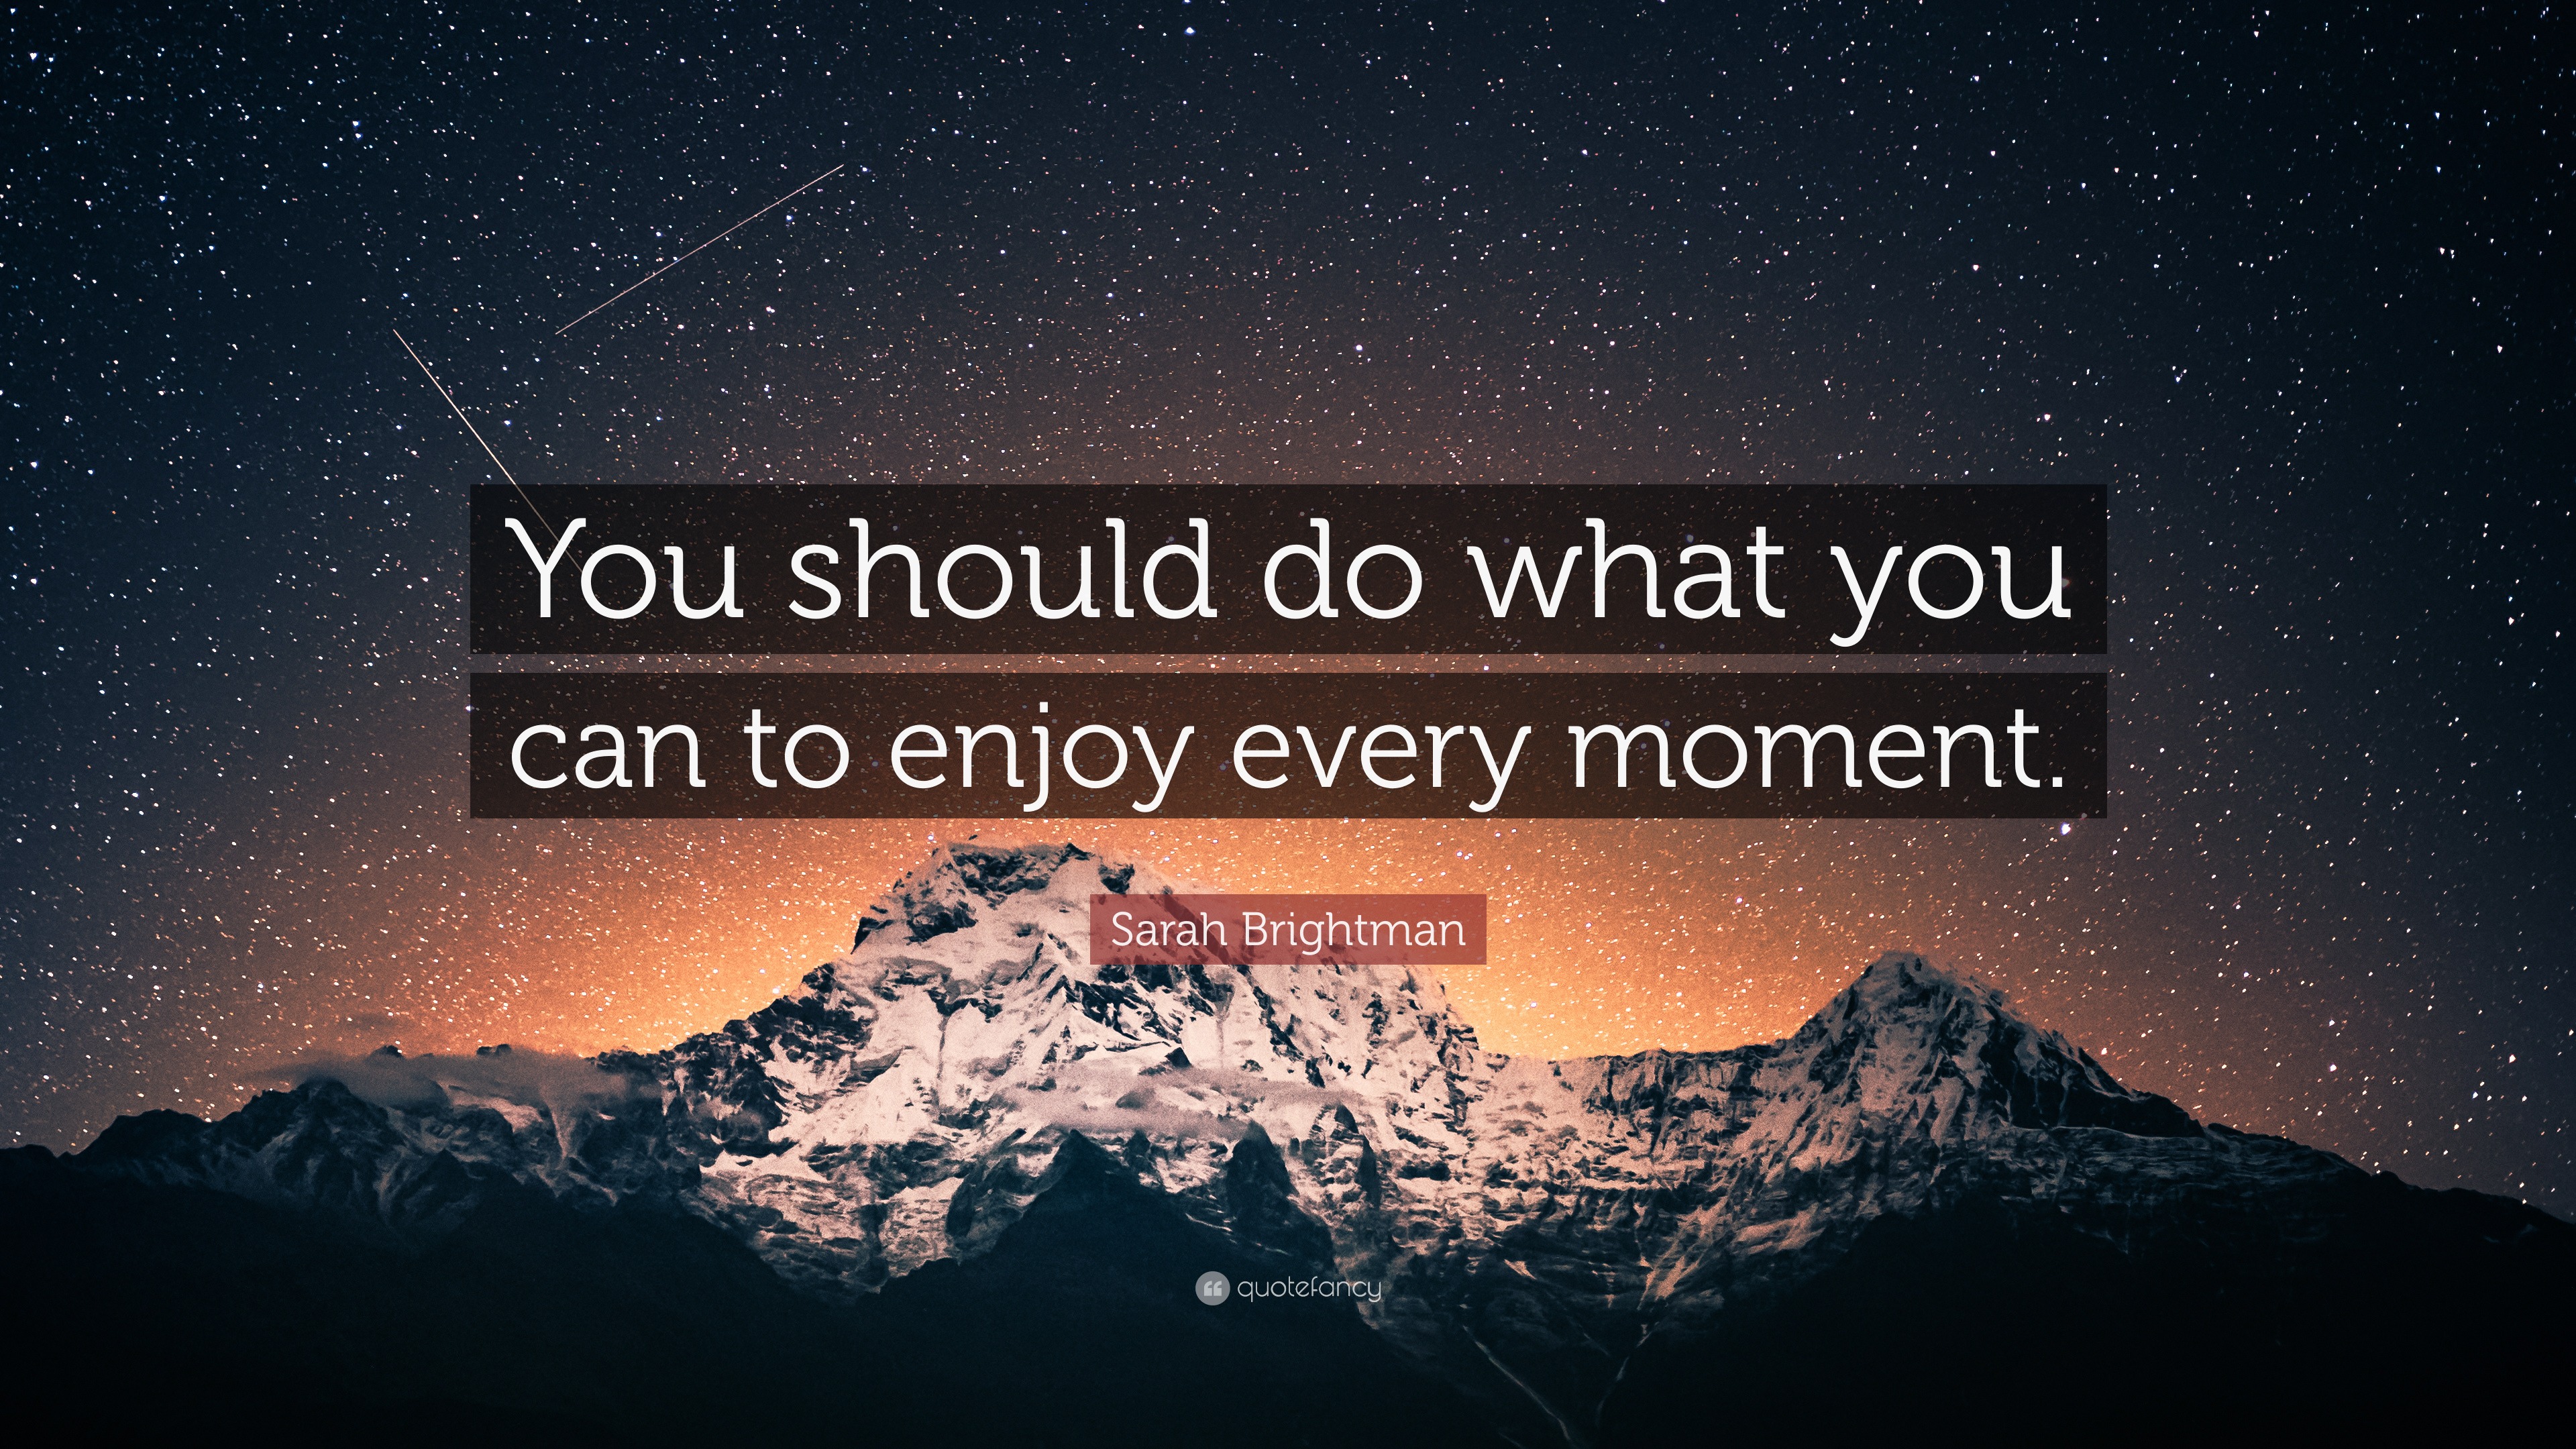 Sarah Brightman Quote “you Should Do What You Can To Enjoy Every Moment”